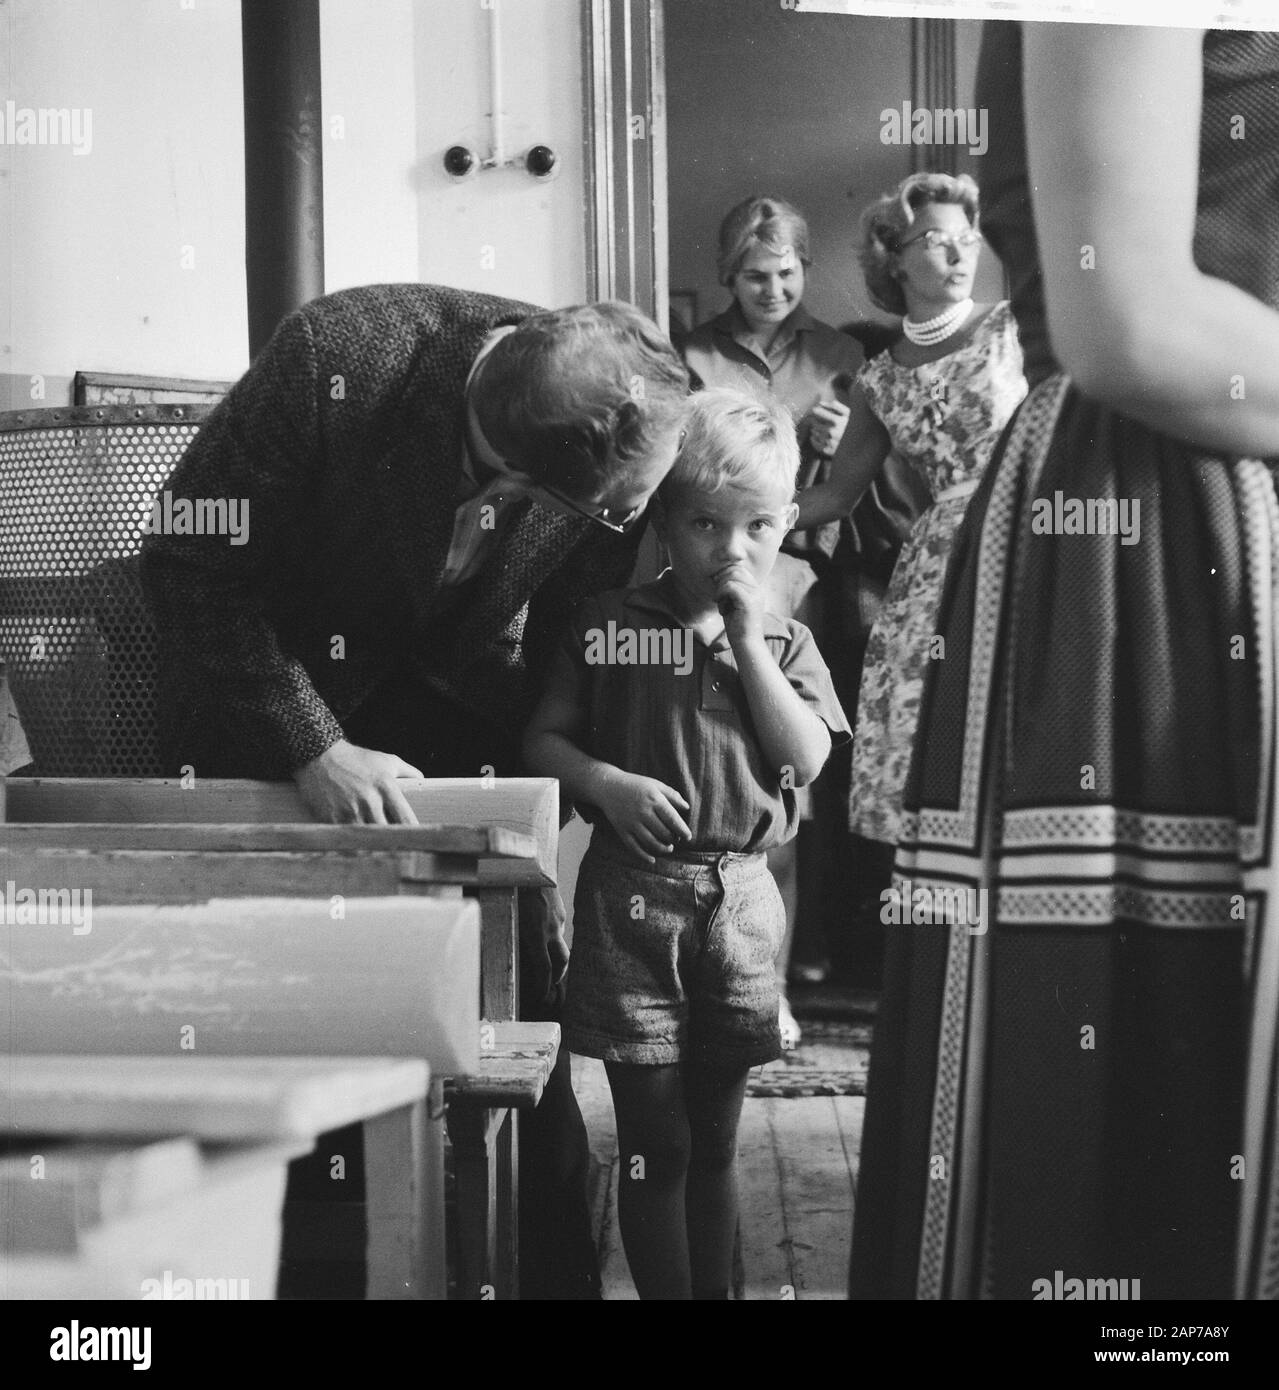 The first big school day, father says goodbye Date: August 22, 1960 Keywords: primary education, pupils, schools Stock Photo